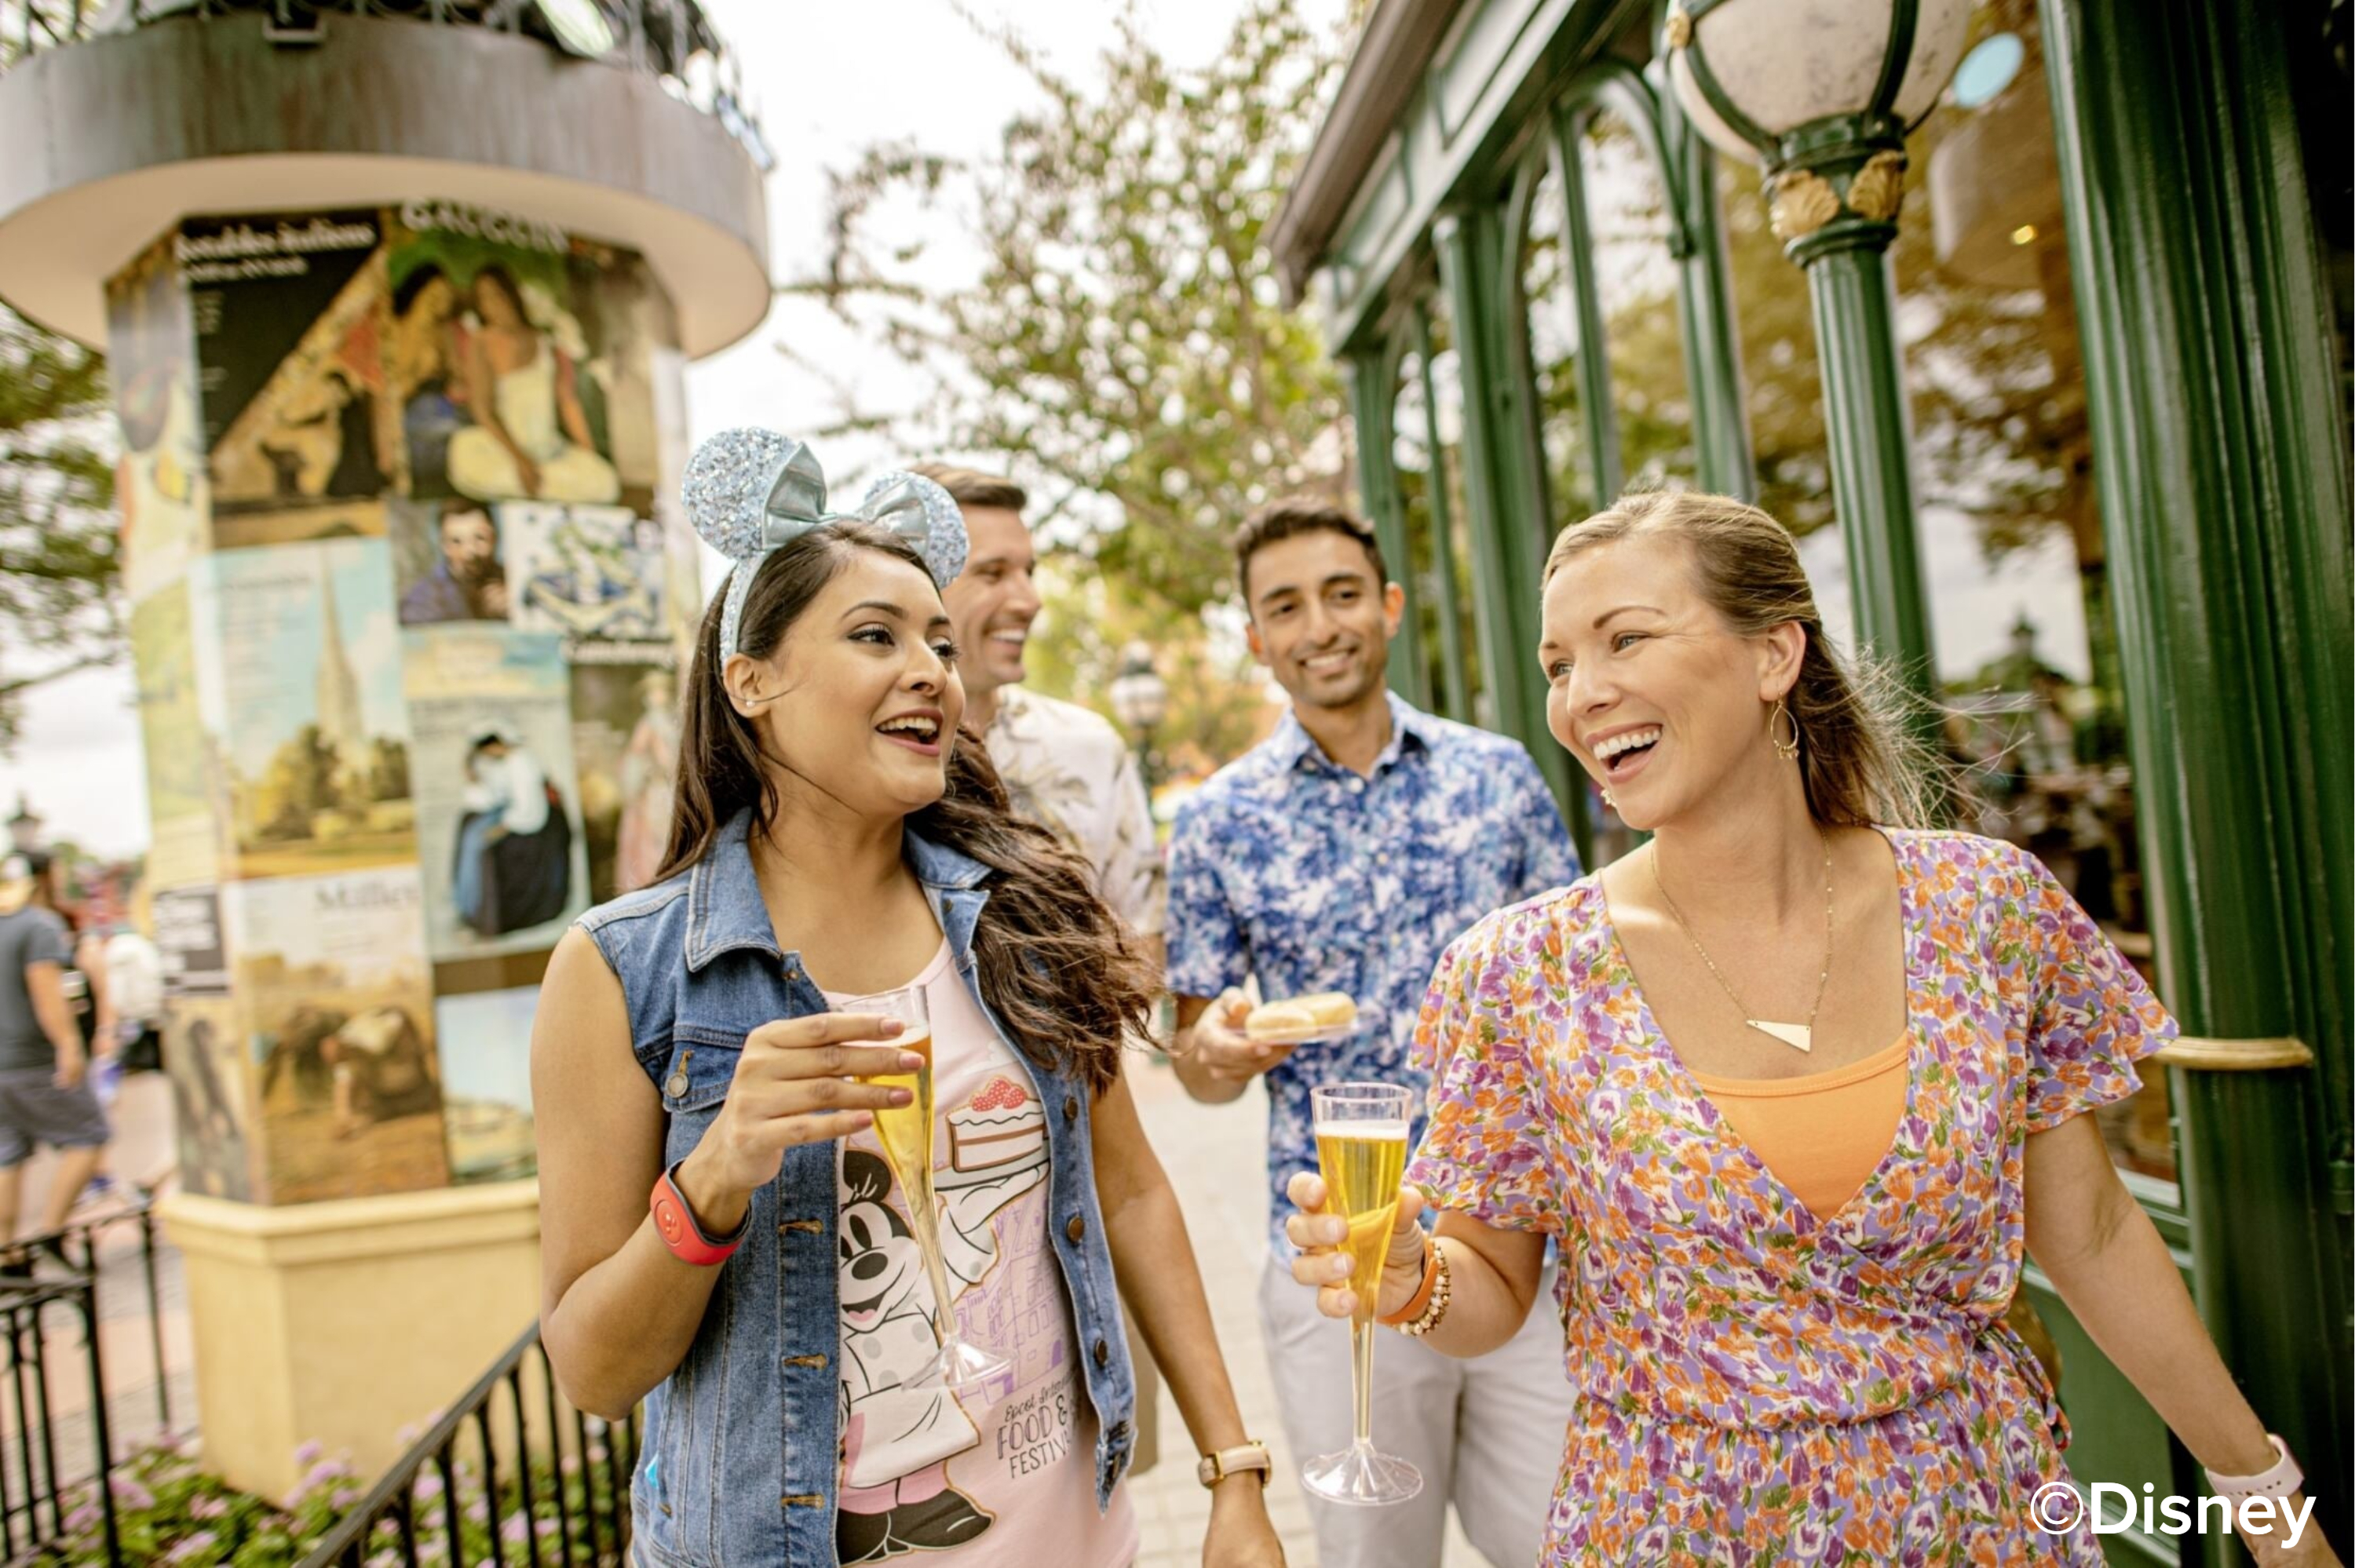 Group of friends enjoy drinks in Epcot